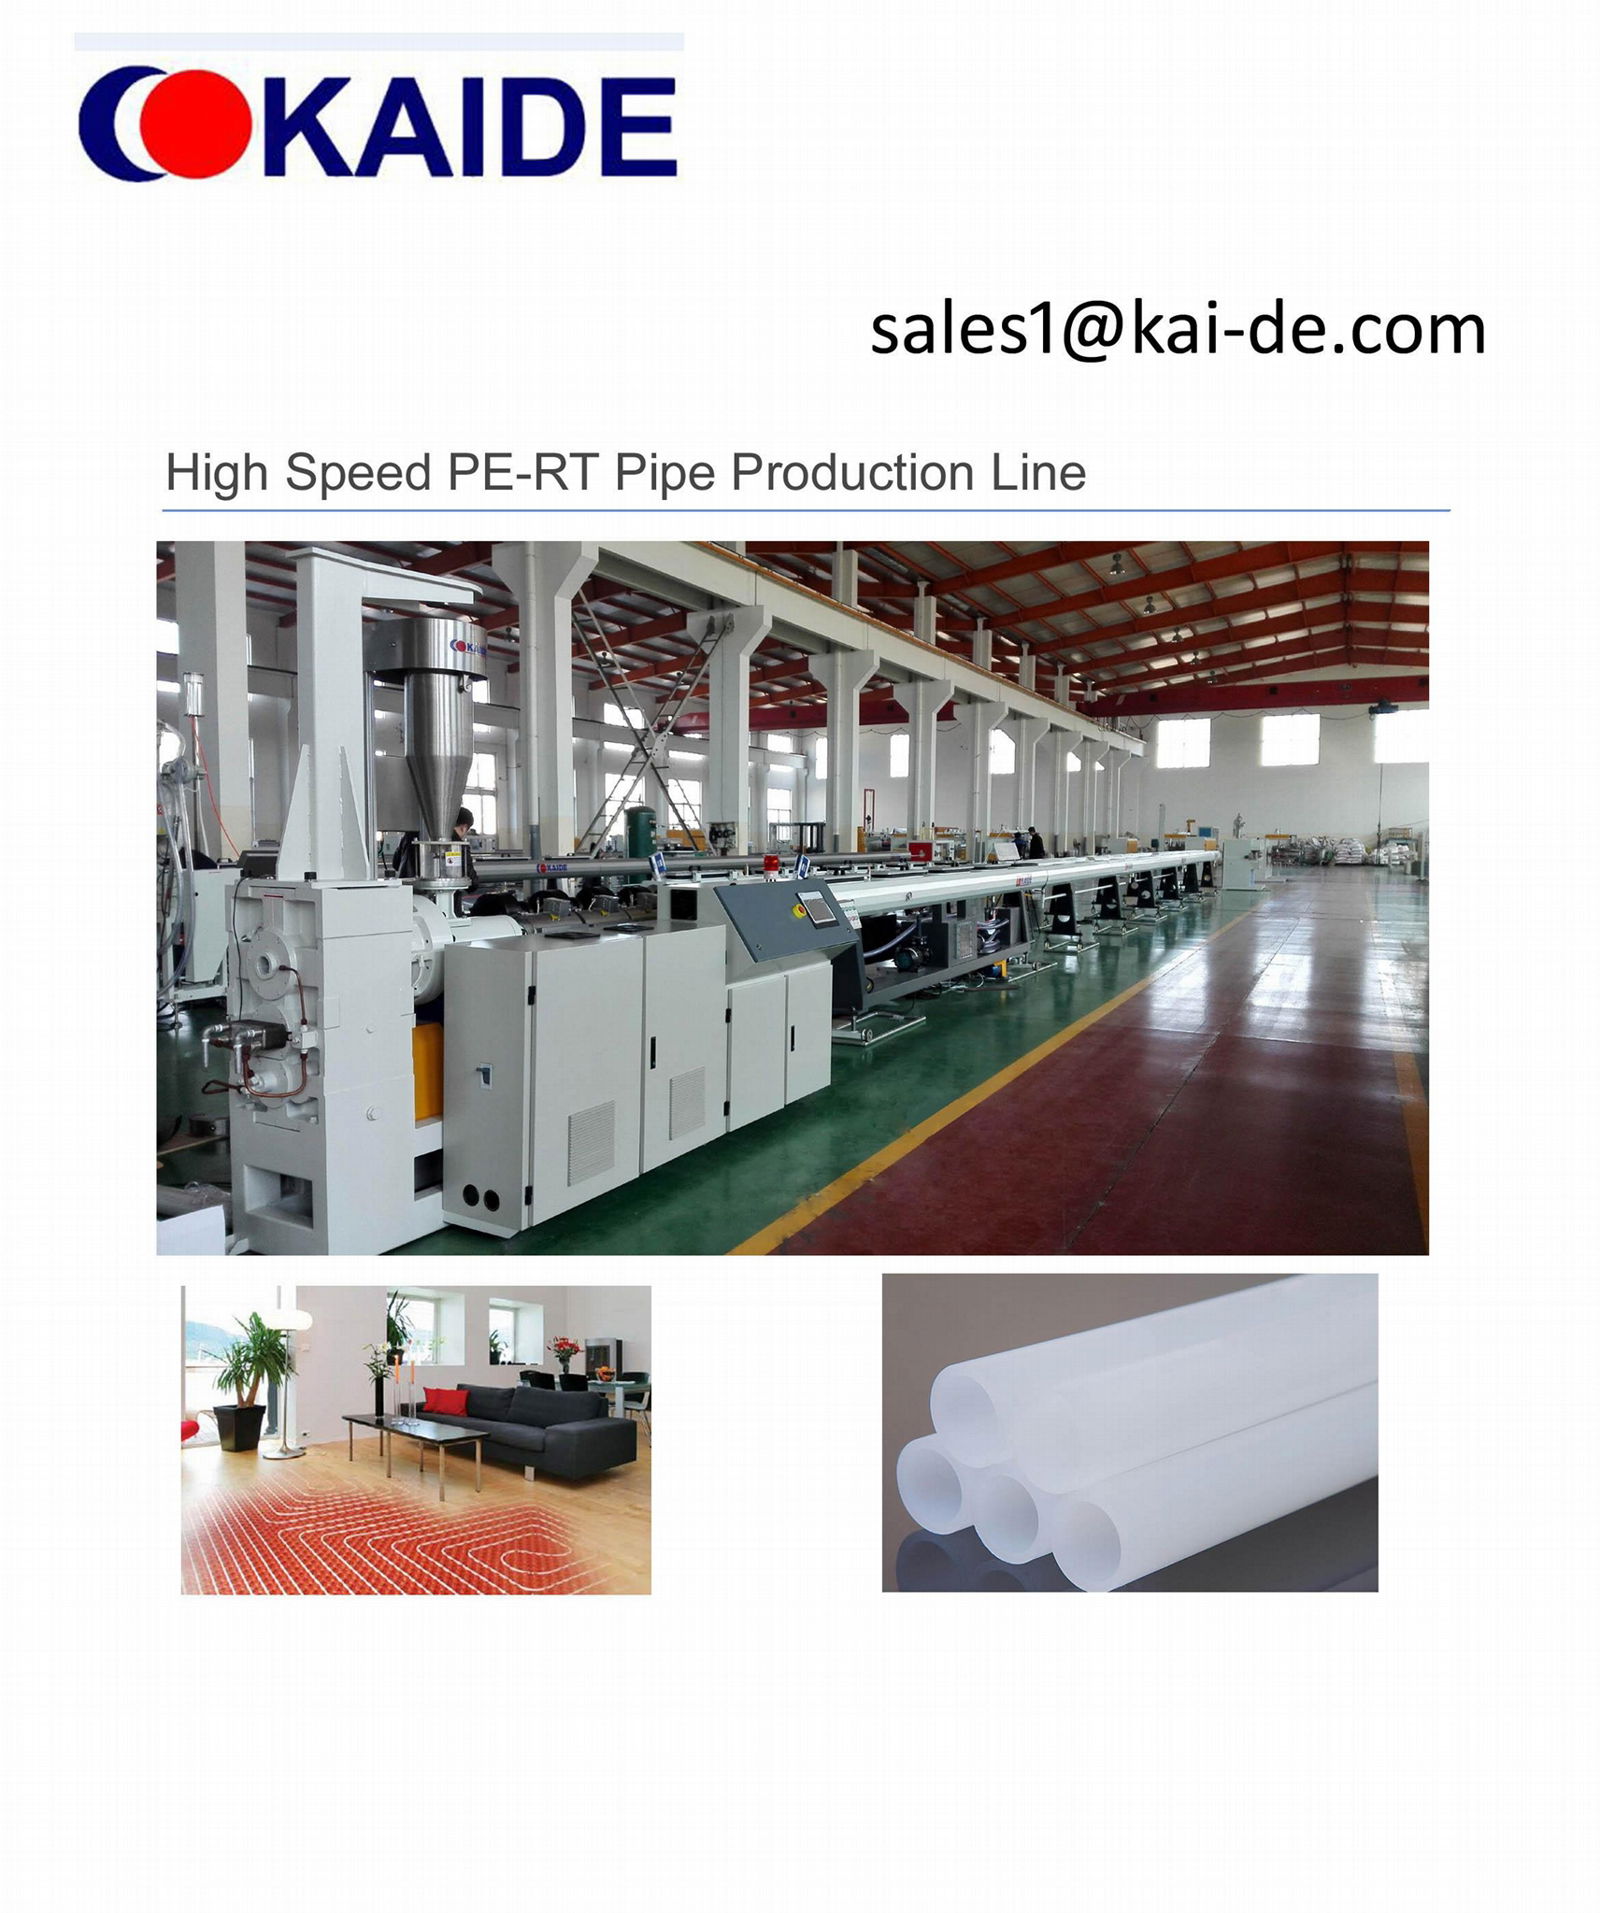 High Speed PE-RT Pipe Production Line